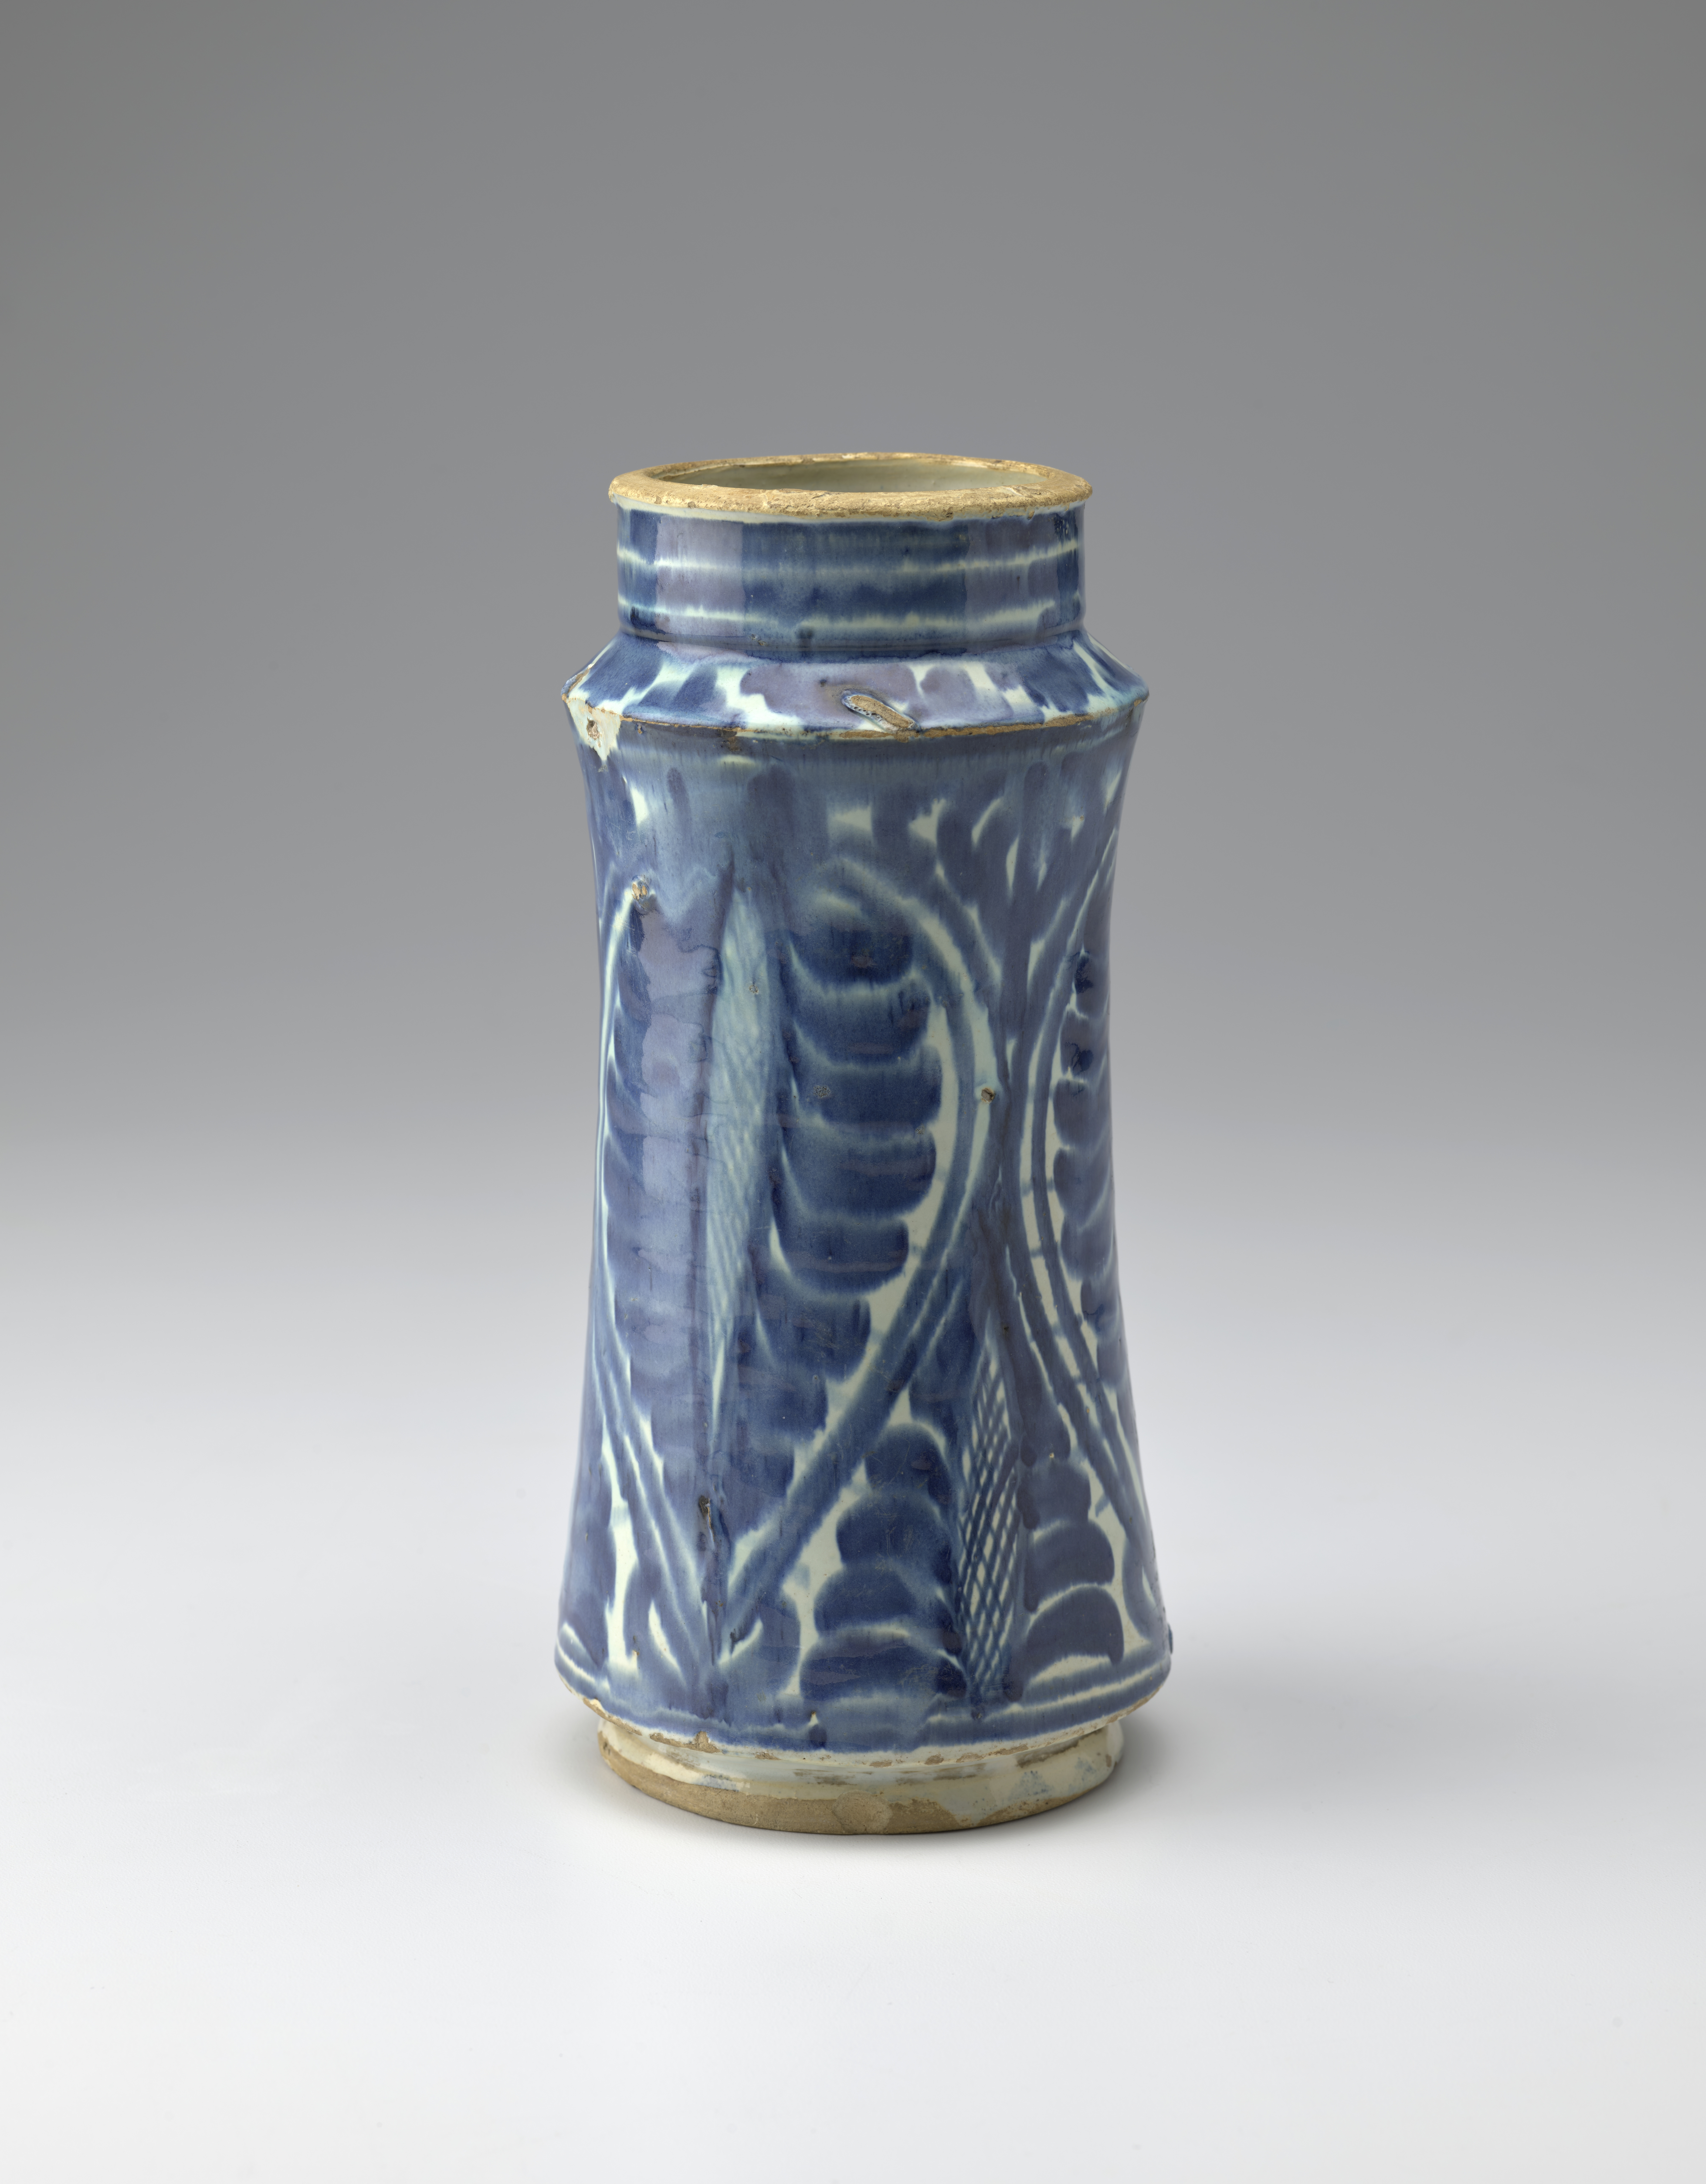 A blue and white pottery jar decorated with a palm branch design.